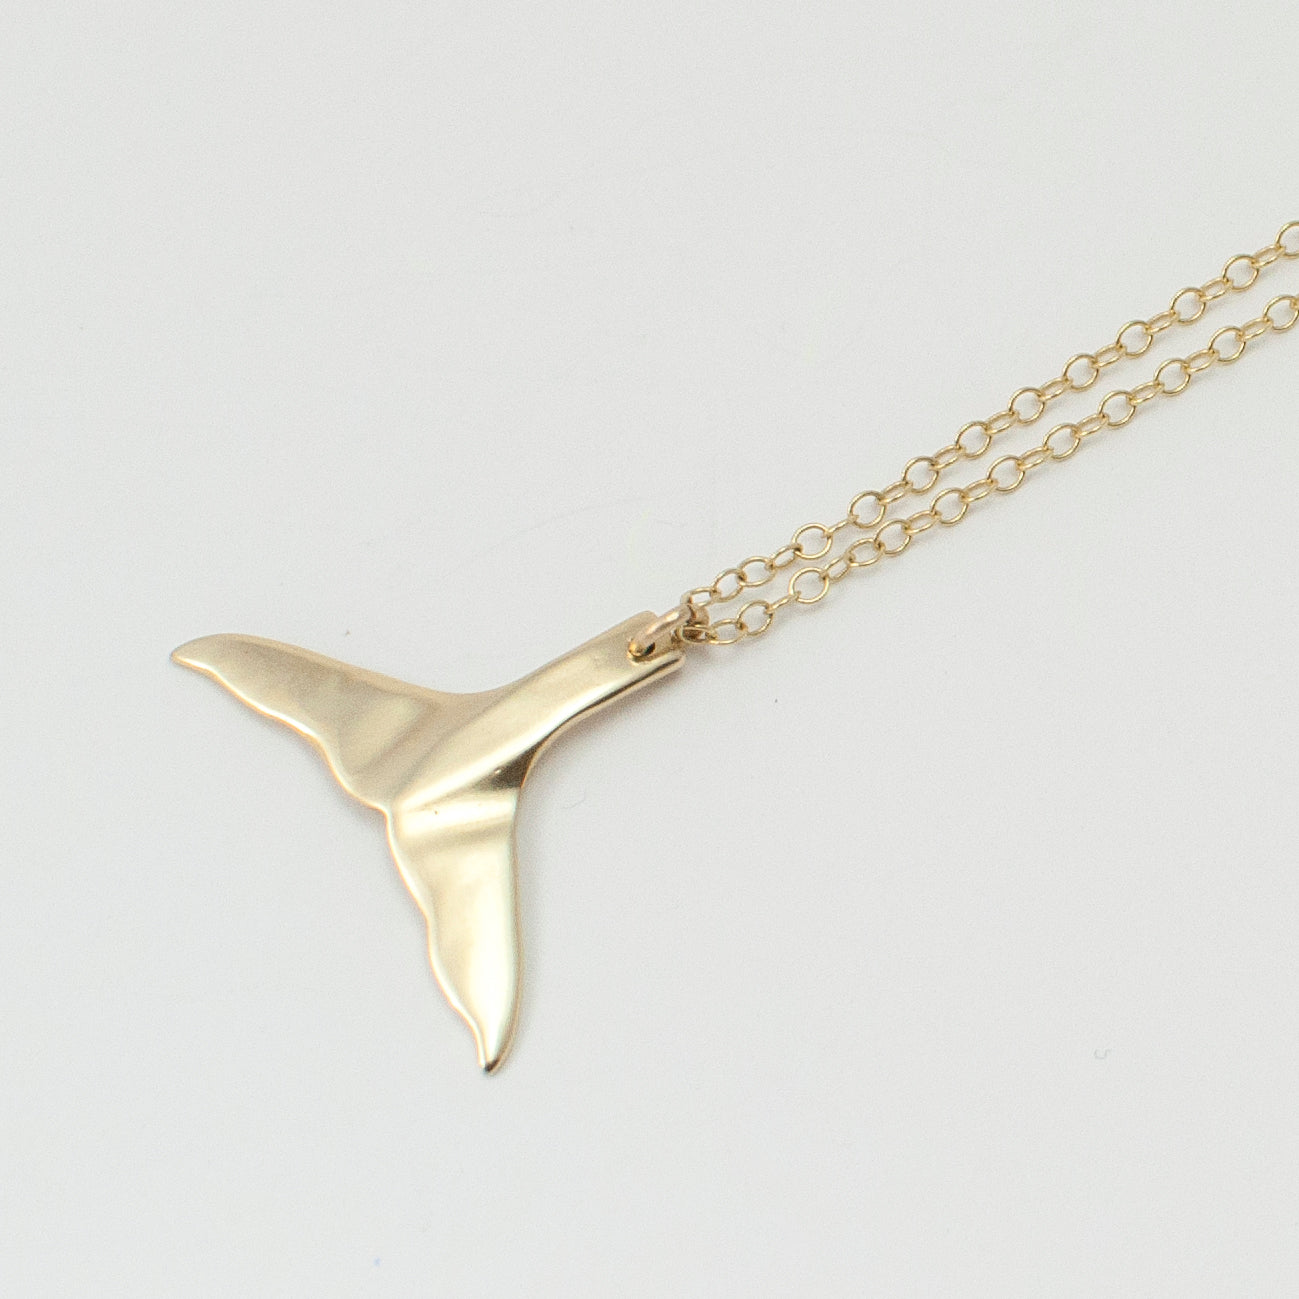 WHALES TAIL Necklace